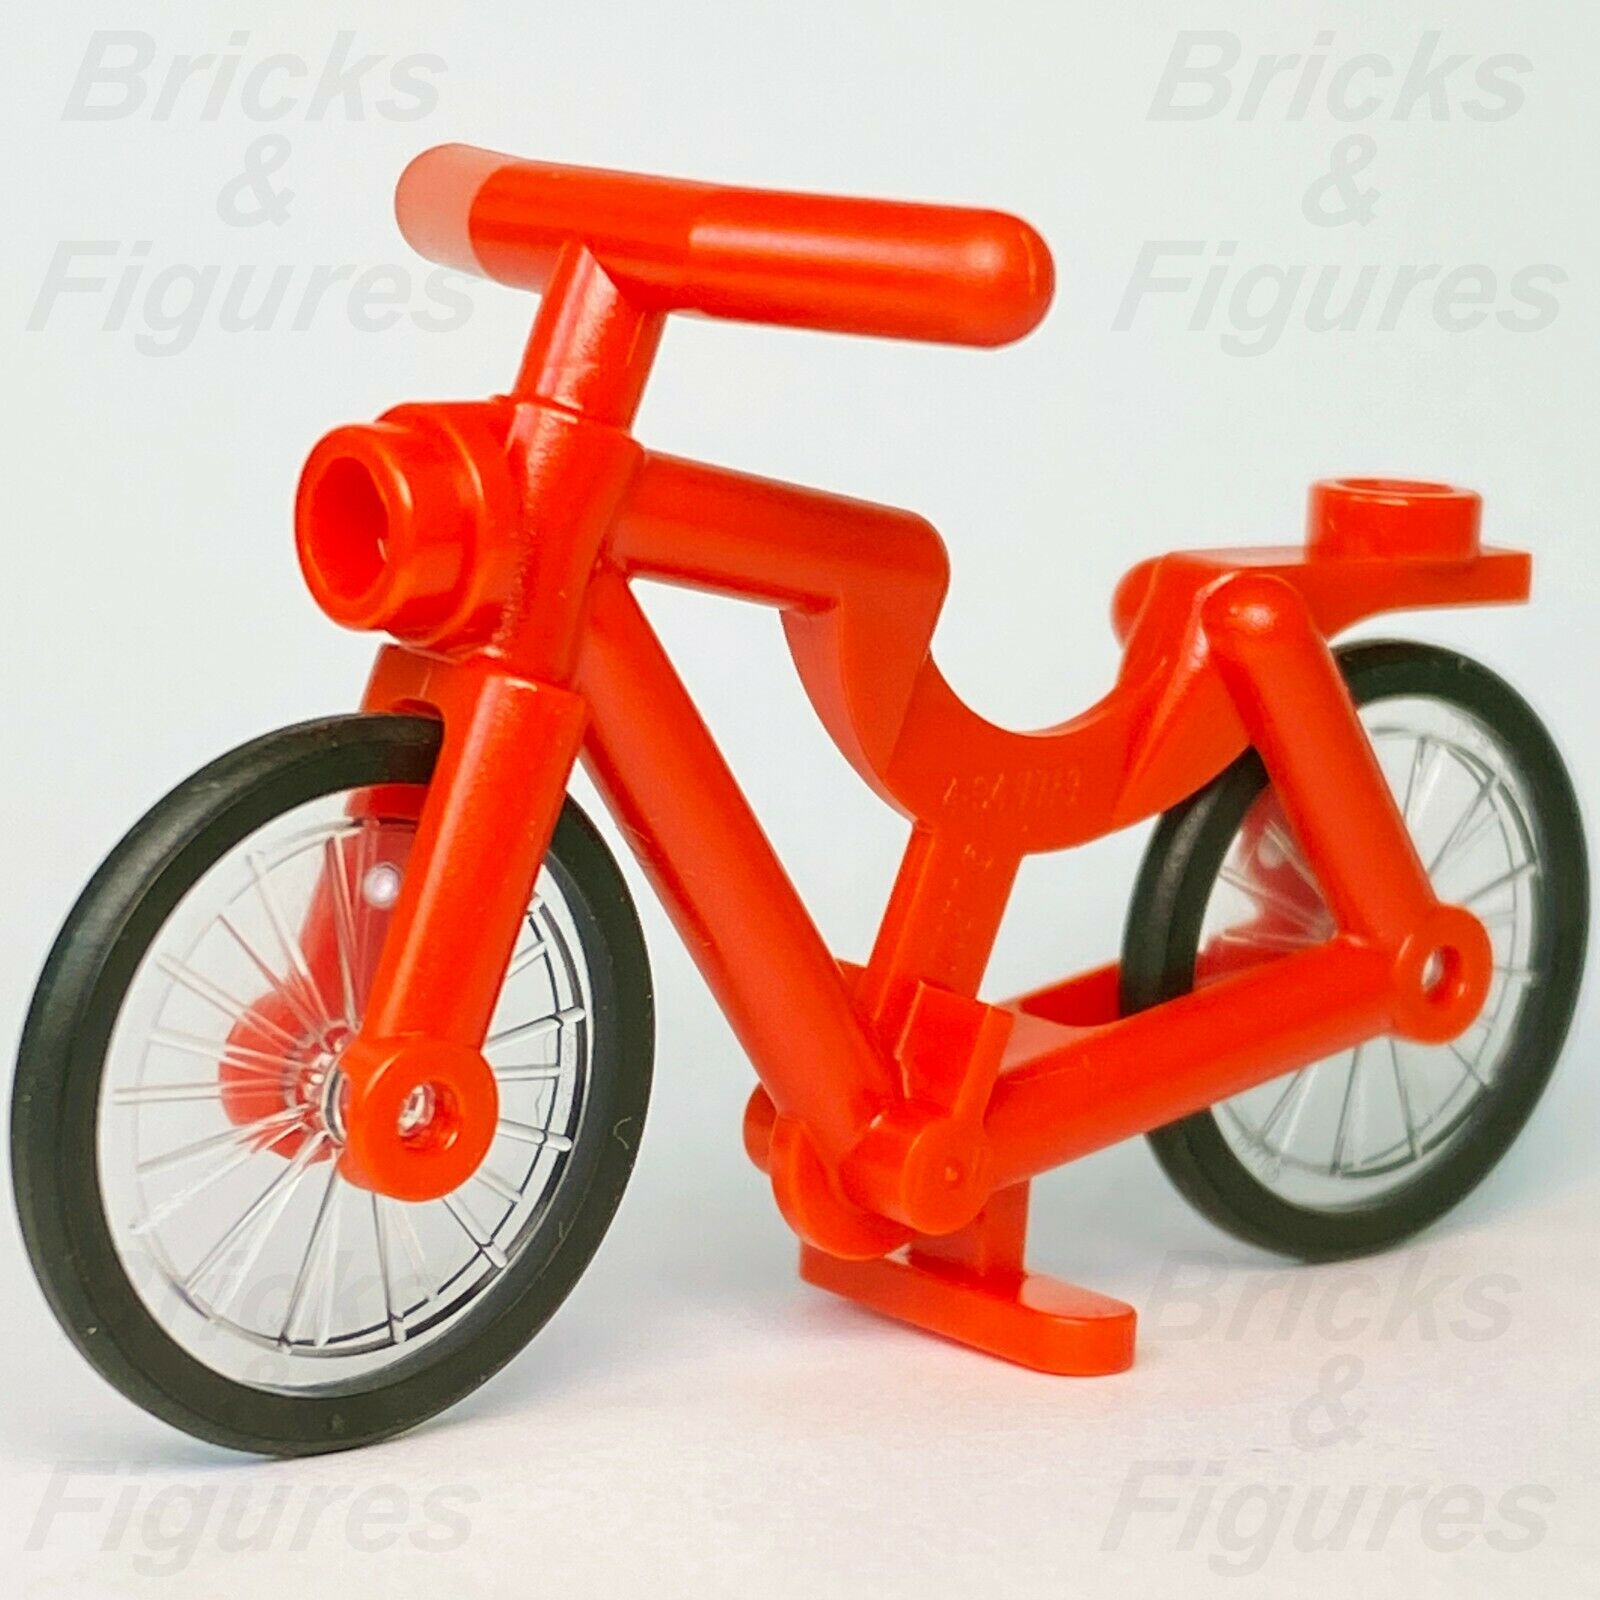 New Town City Recreation LEGO Red Bicycle with Wheels Sport Bike Genuine Parts - Bricks & Figures